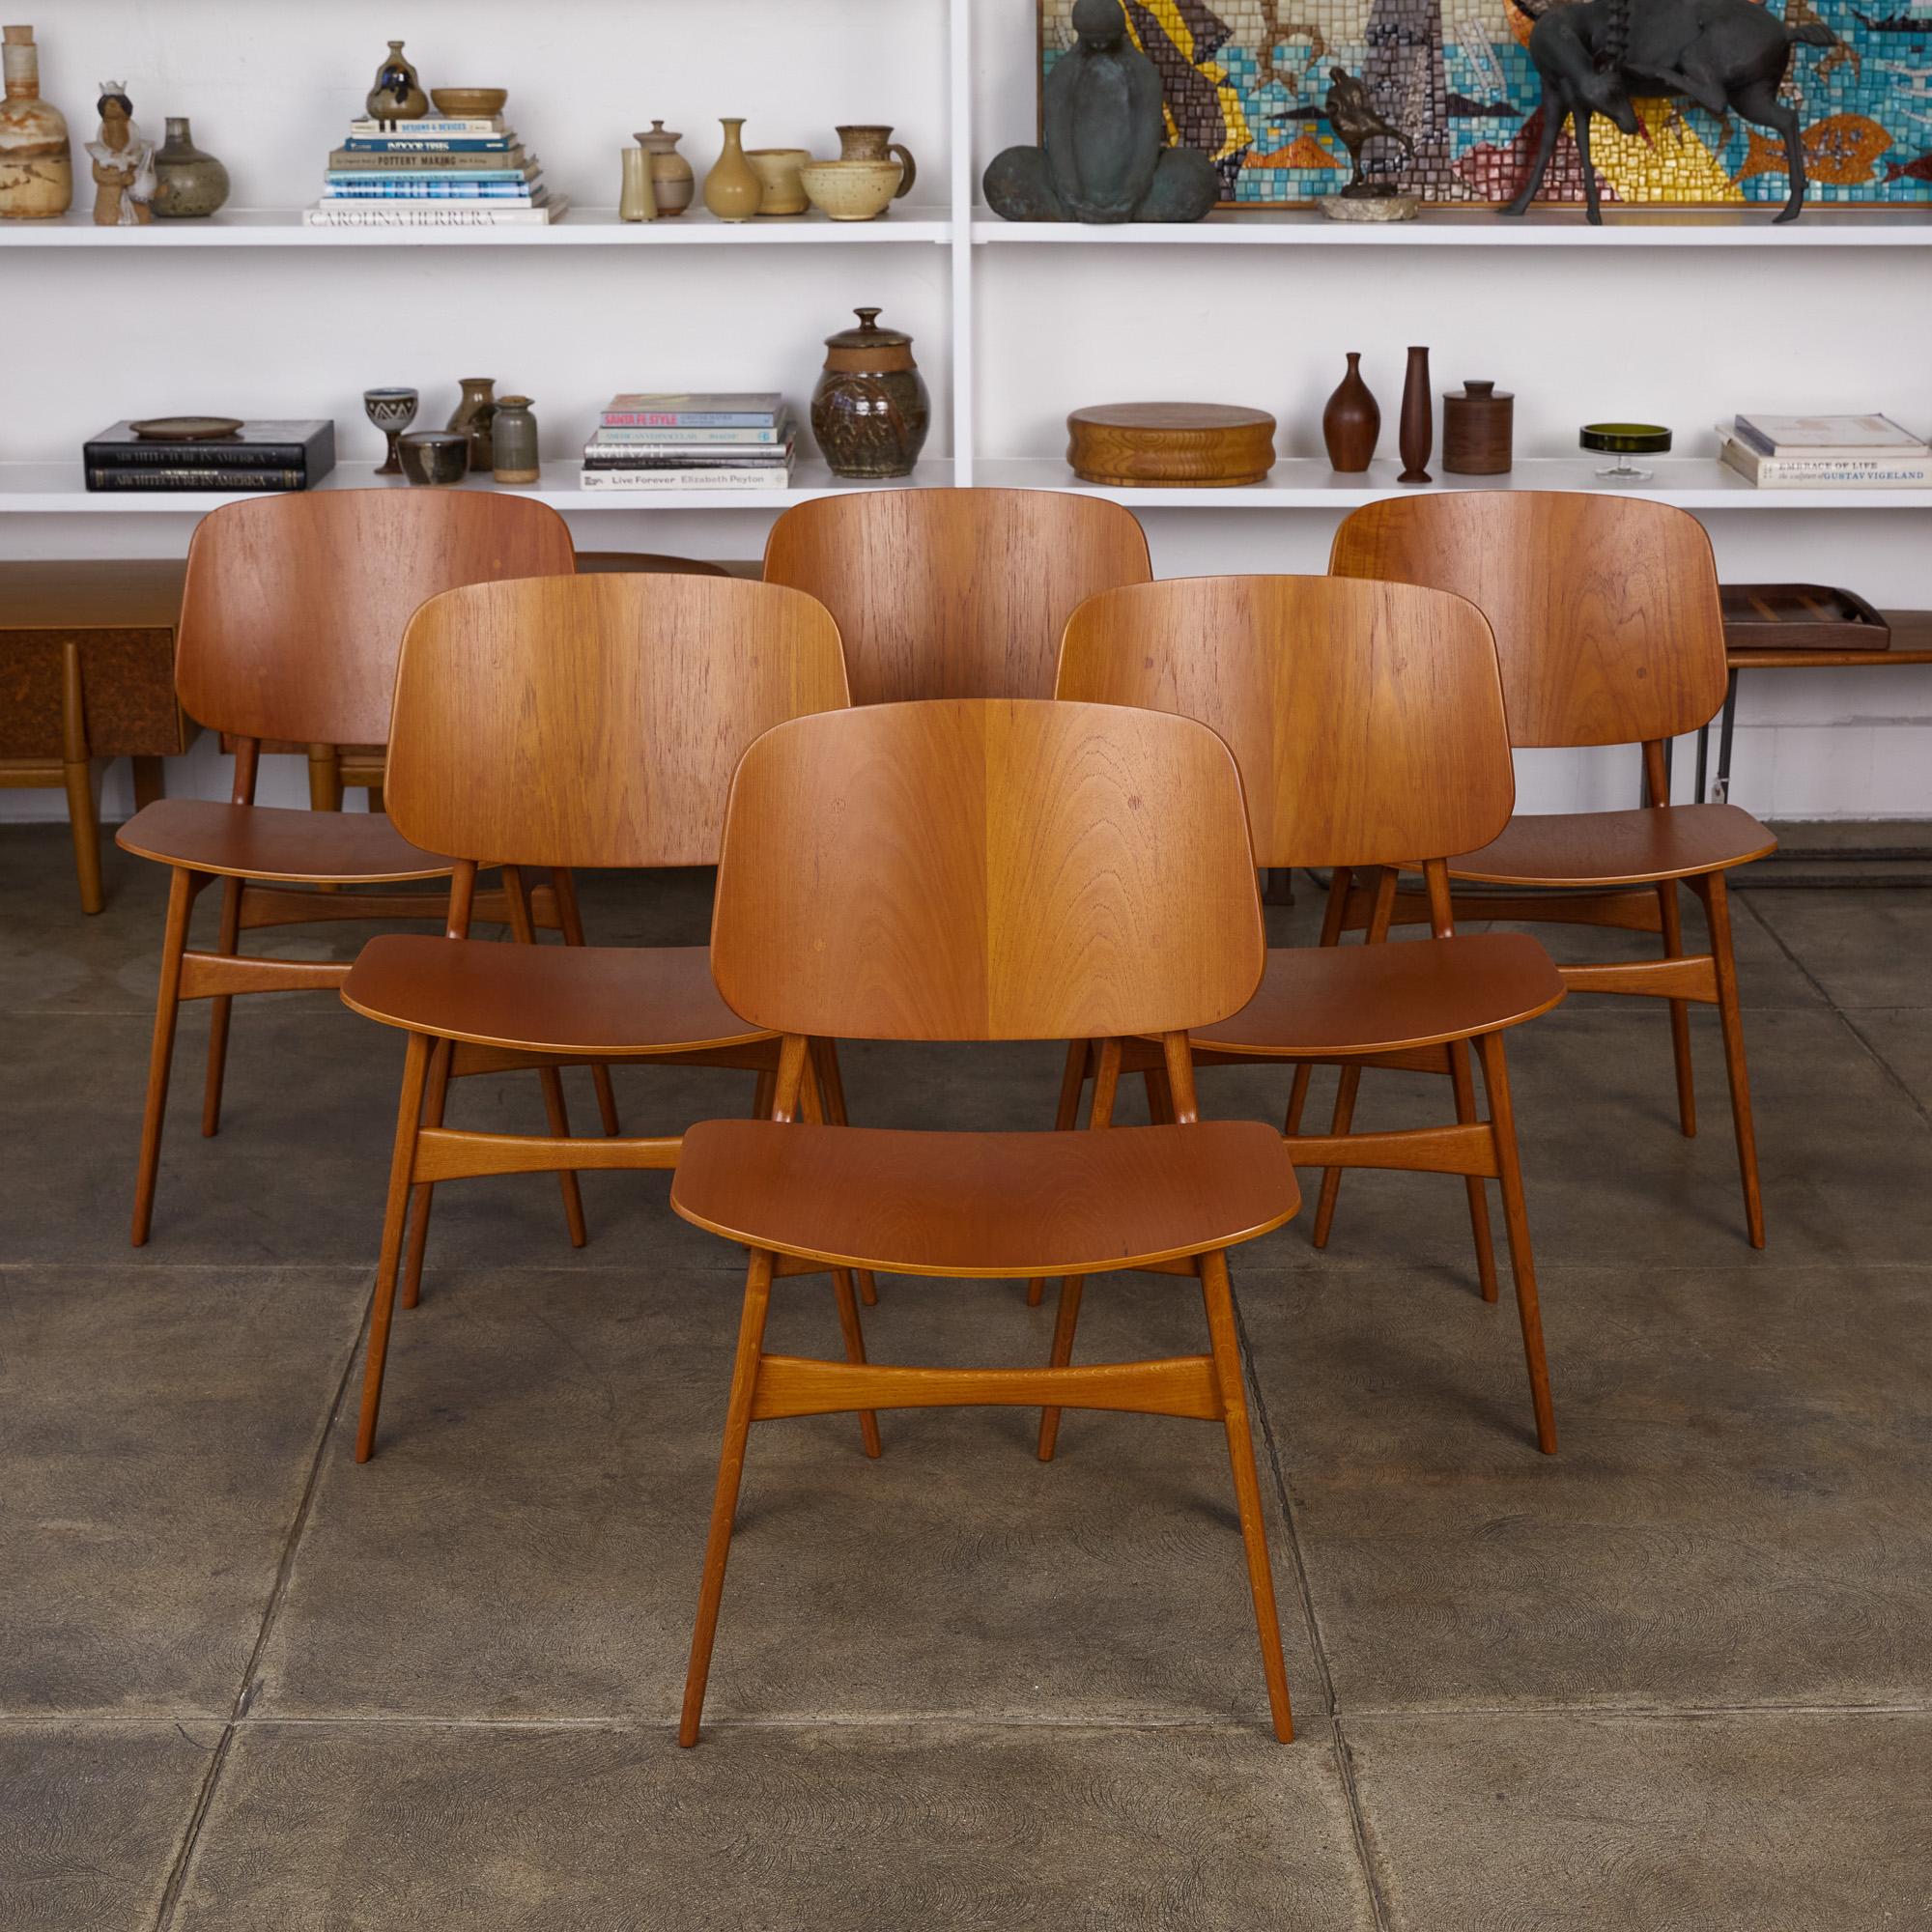 Set of six Børge Mogensen Model 122 dining chairs for Søborg Møbelfabrik, Denmark, circa 1950. The chairs feature sculpted teak plywood seats and backs, while the legs and frame are made of solid teak. The chair backs and solid teak stretchers are